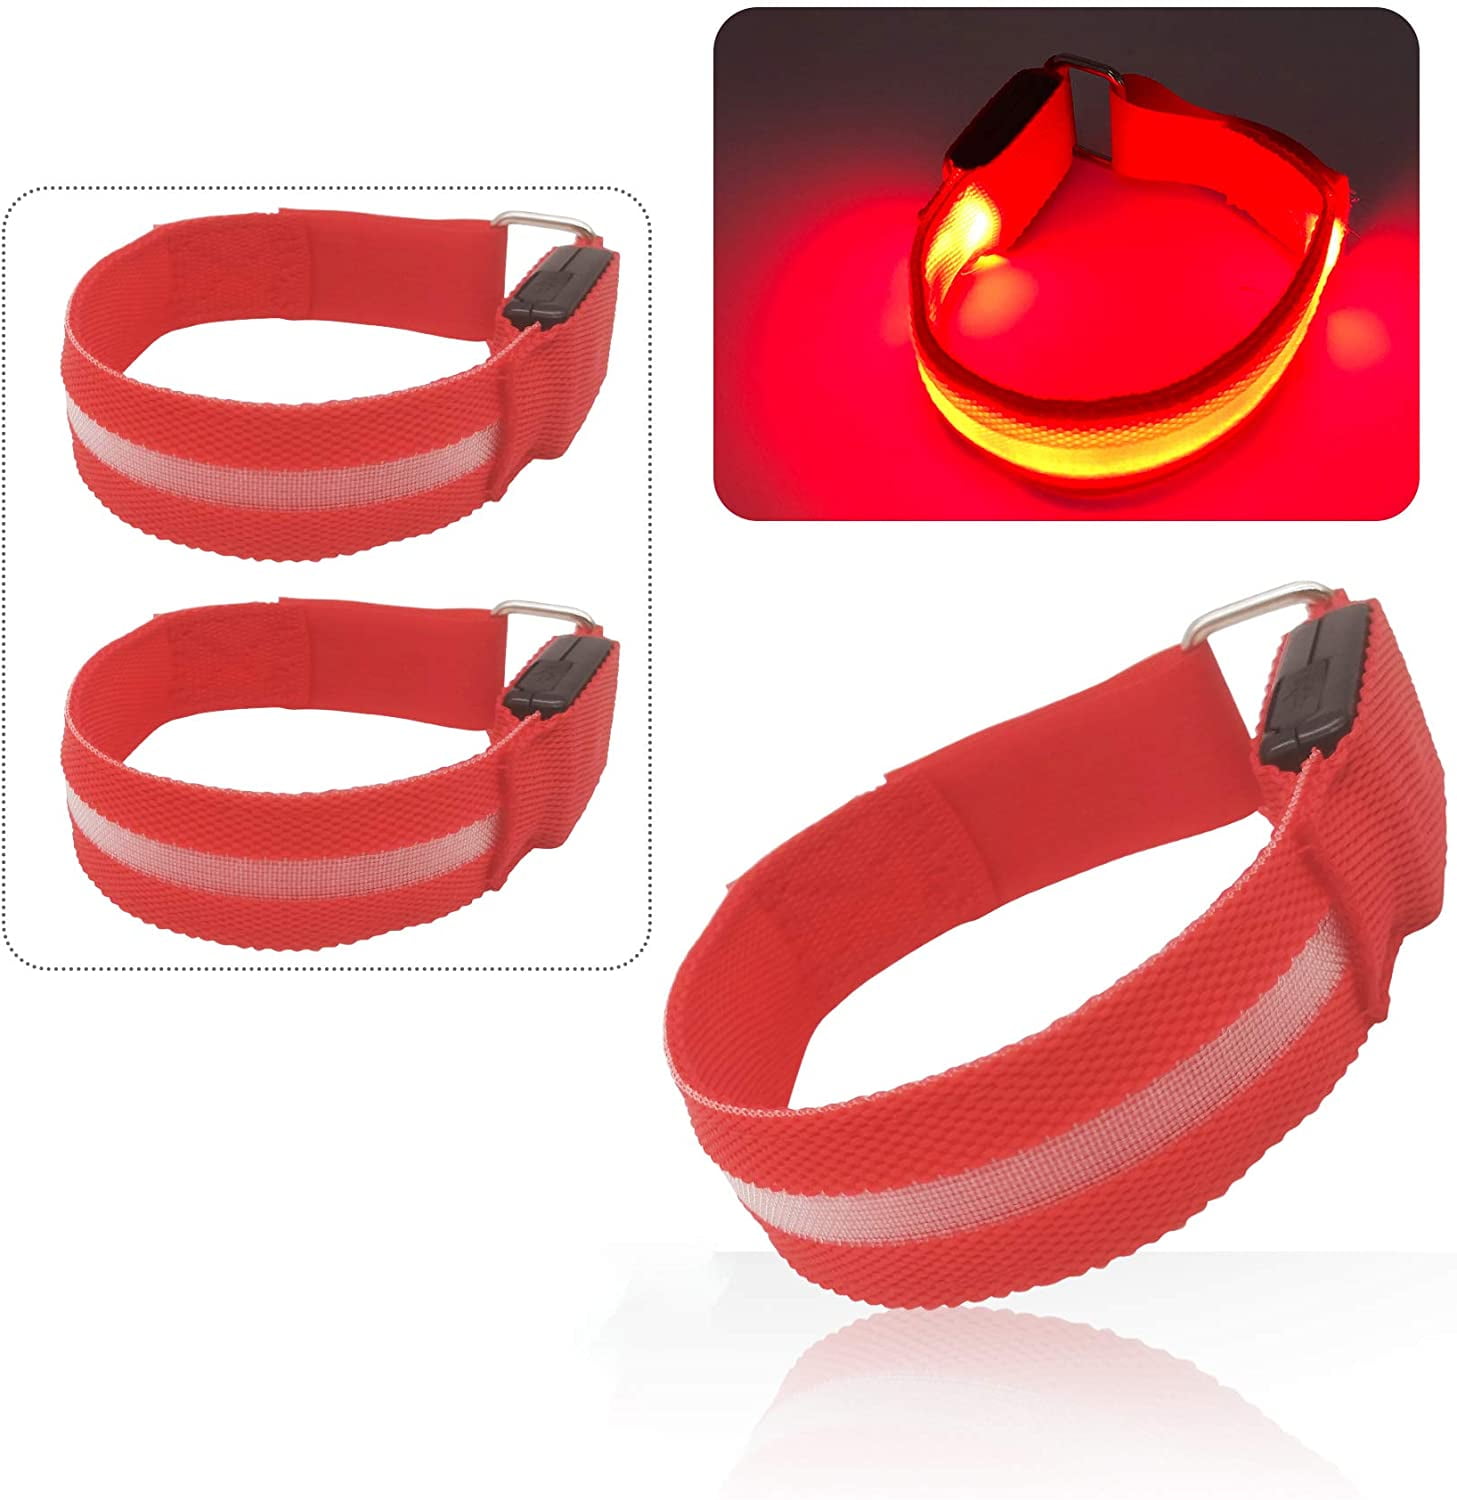 Red Reflective Safety Arm Band Light Up Cycling Jogging Running Hiking Sport 